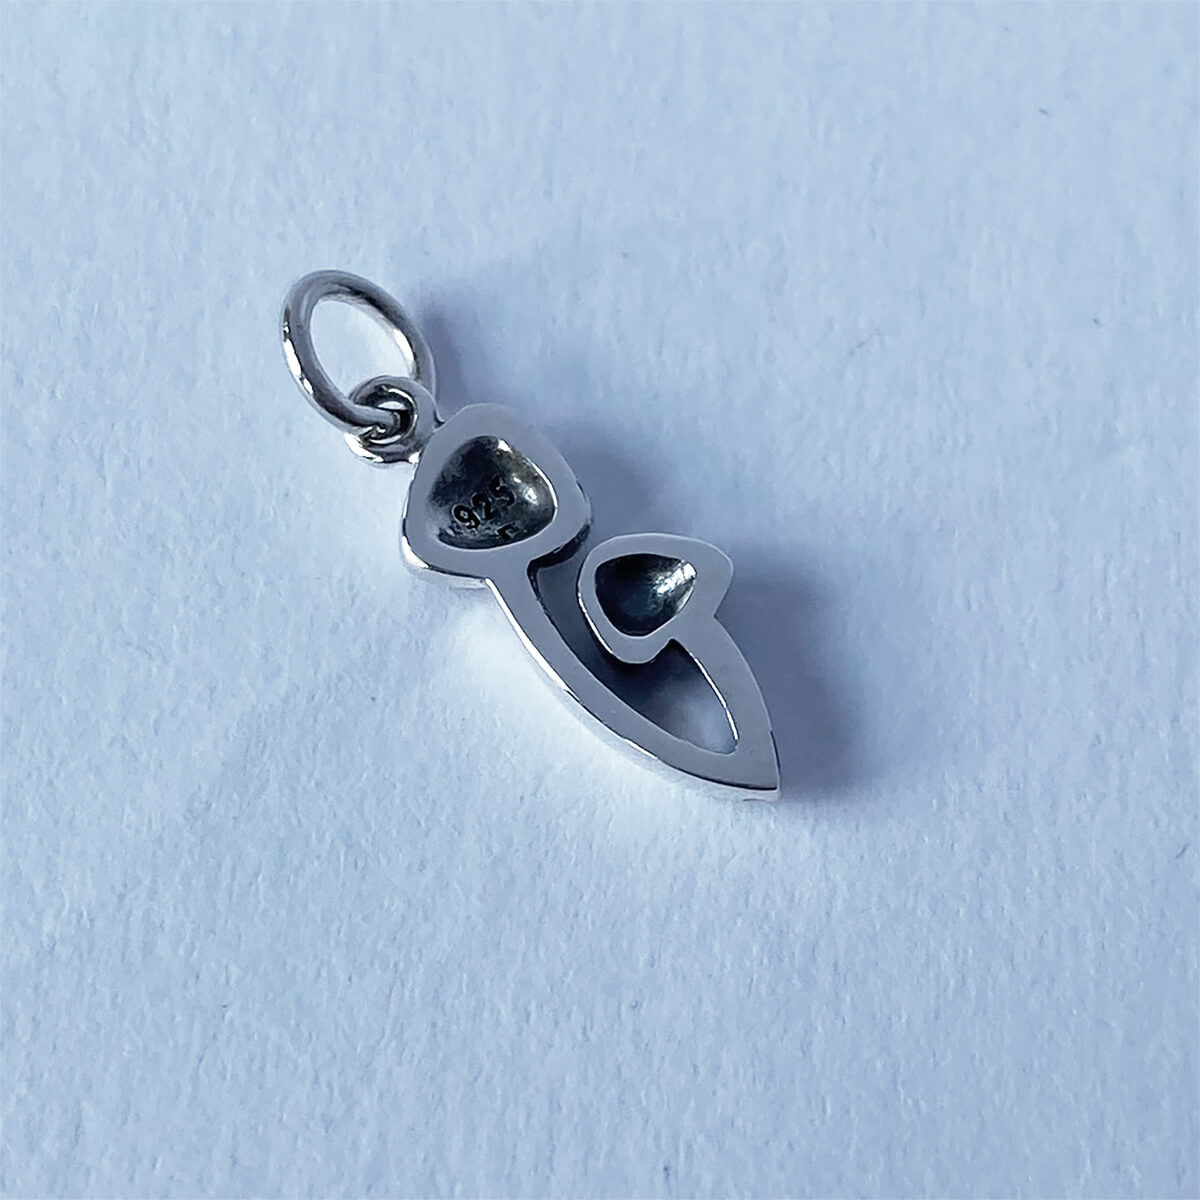 Small toadstools charm sterling silver pendant